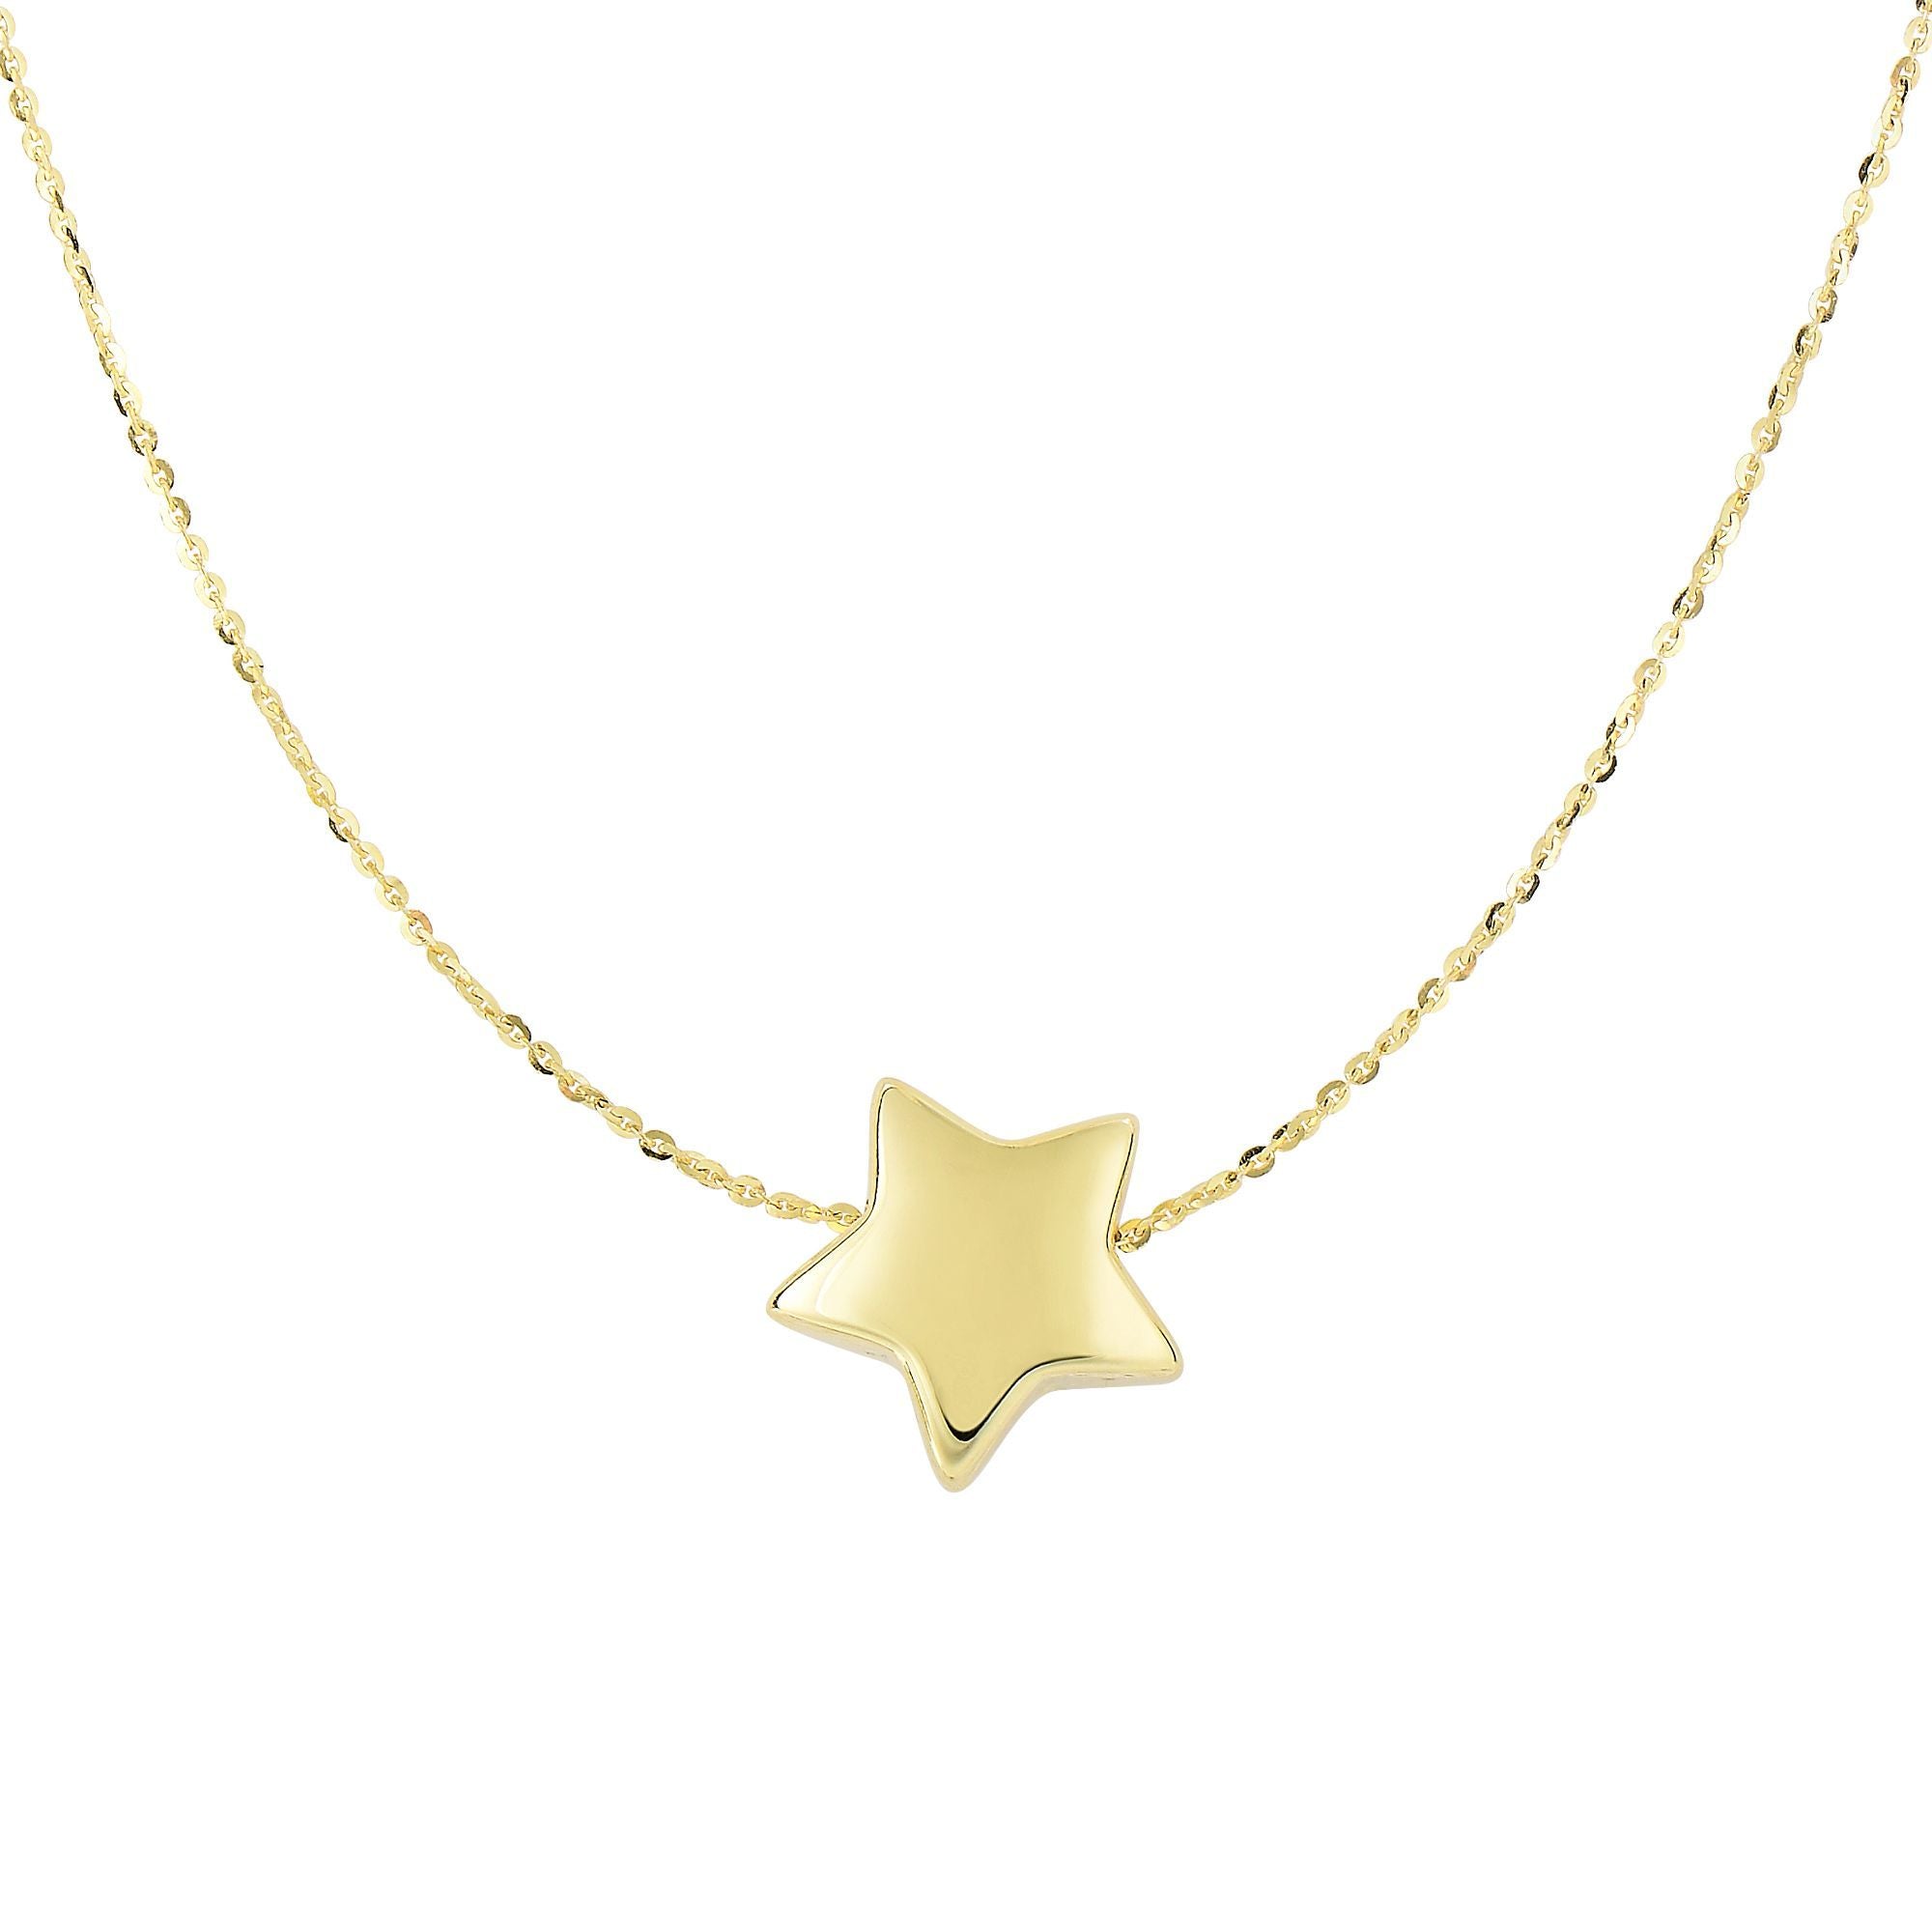 Minimalist Solid Gold Lucky Star Puffed Necklace - wingroupjewelry